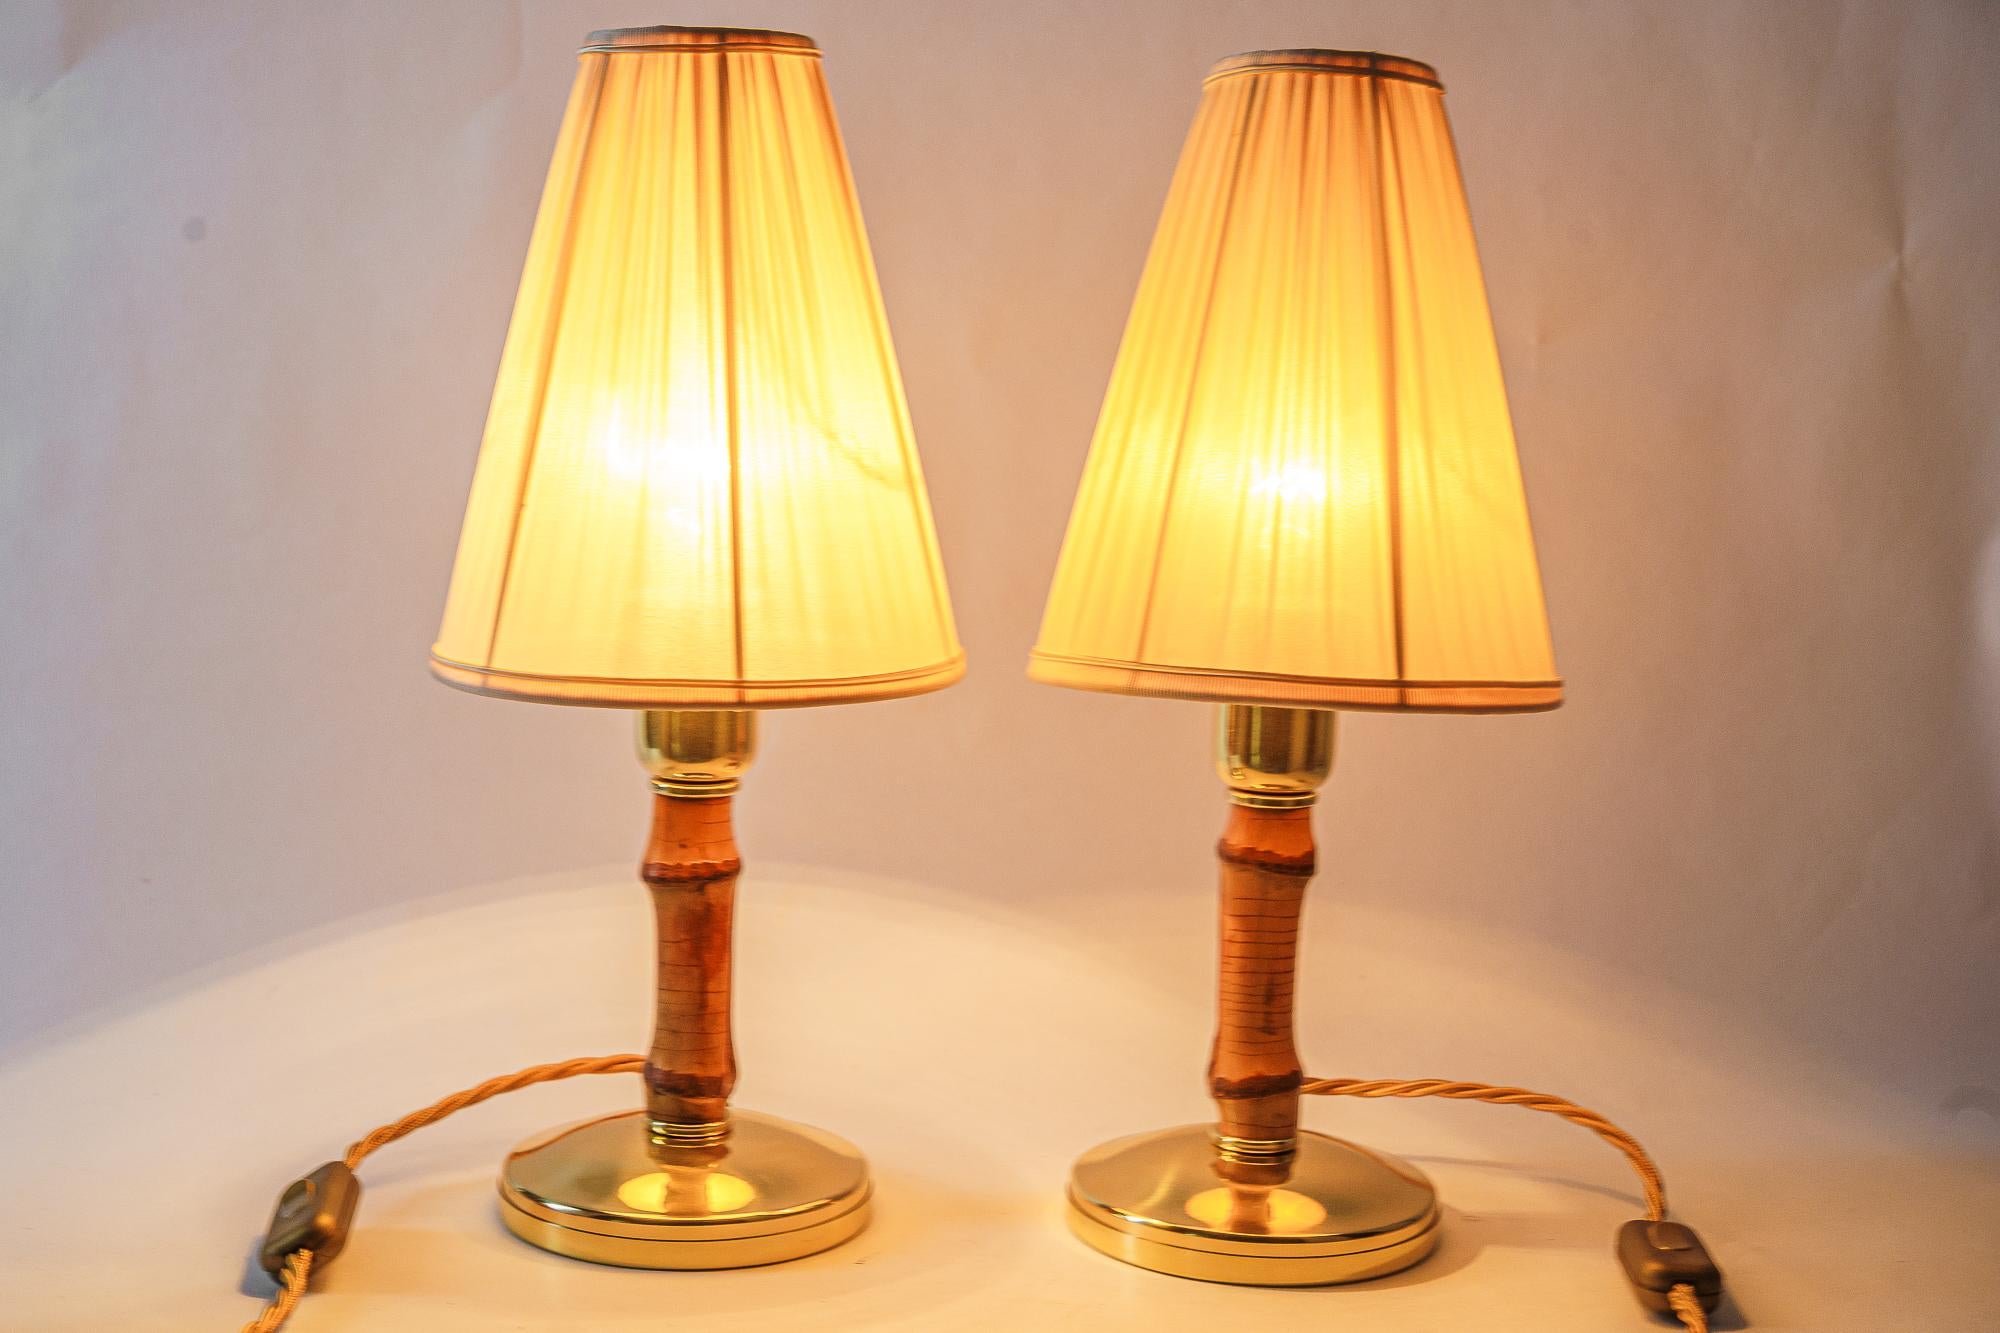 2 Rupert Nikoll Bamboo Table Lamps with Fabric Shades Austria Around 1950s In Good Condition For Sale In Wien, AT